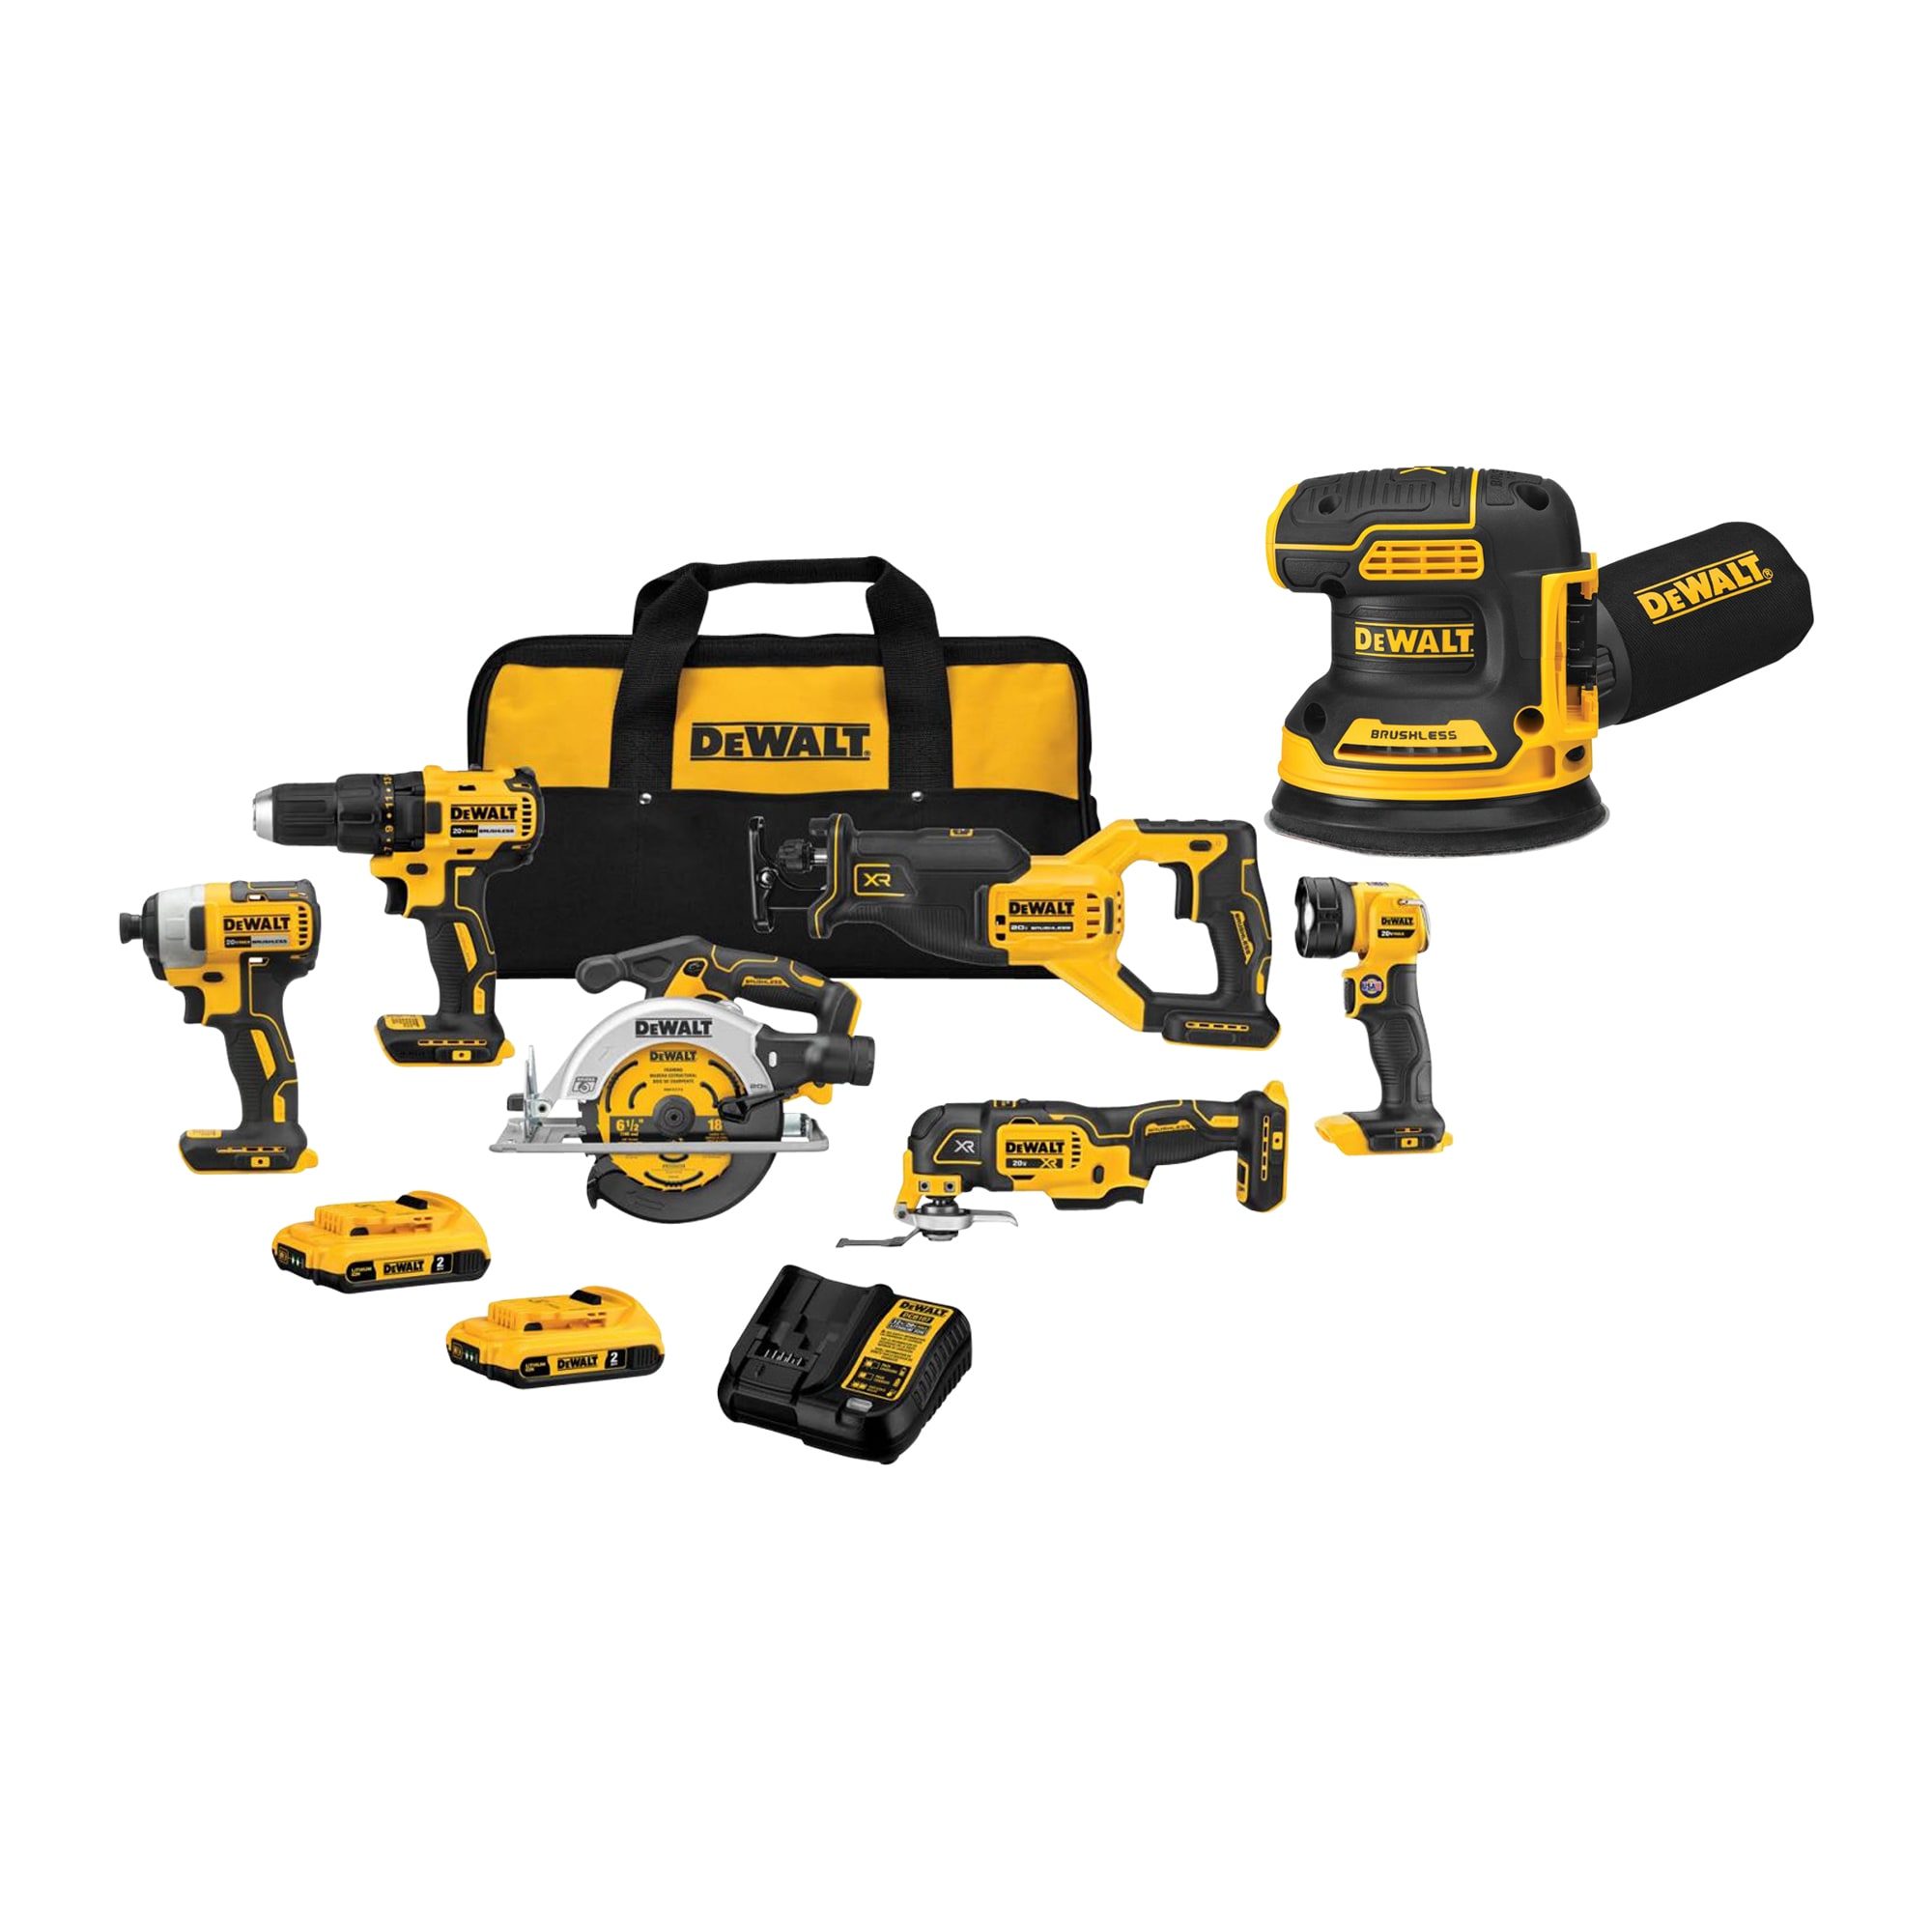 DEWALT 6-Tool 20-Volt Max Brushless Power Tool Combo Kit with Soft Case (2-Batteries and charger Included) & 20-Volt Brushless Cordless Variable